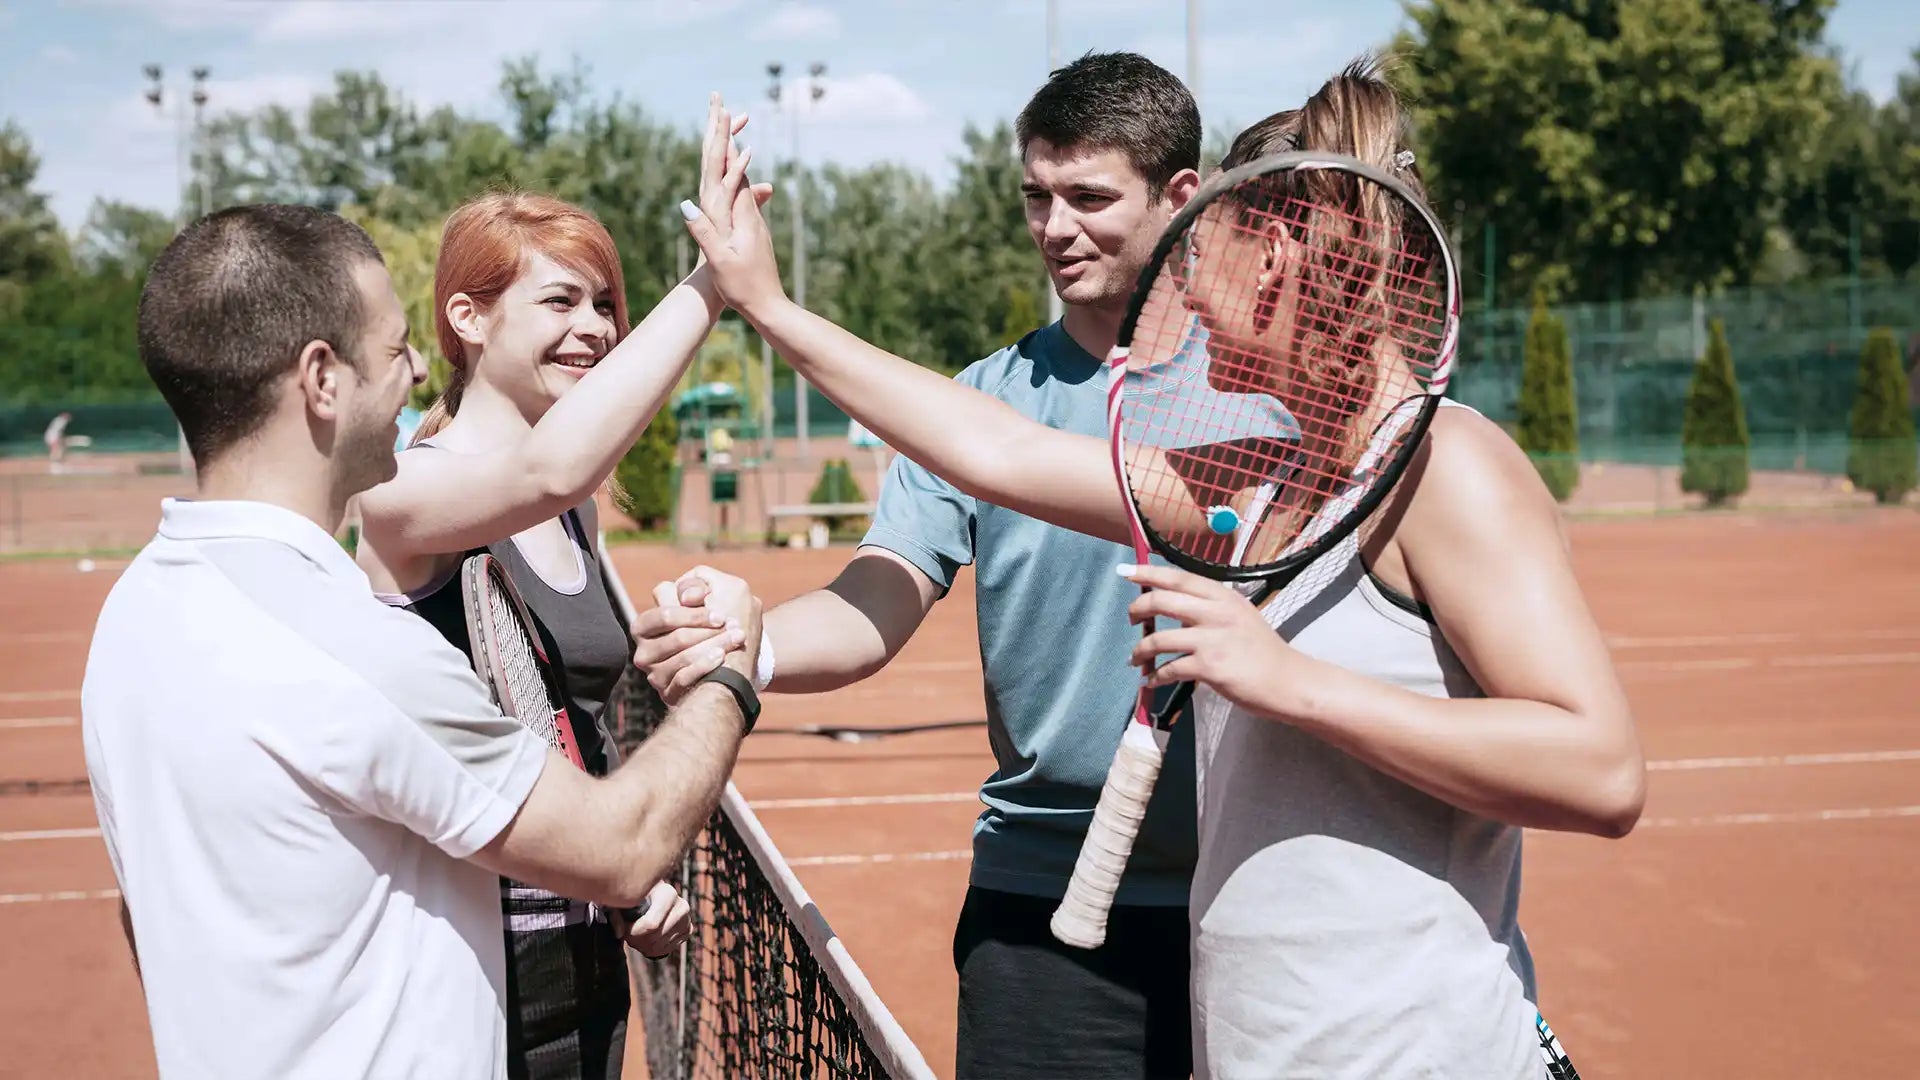 Tennis players greeting each other after a tennis match